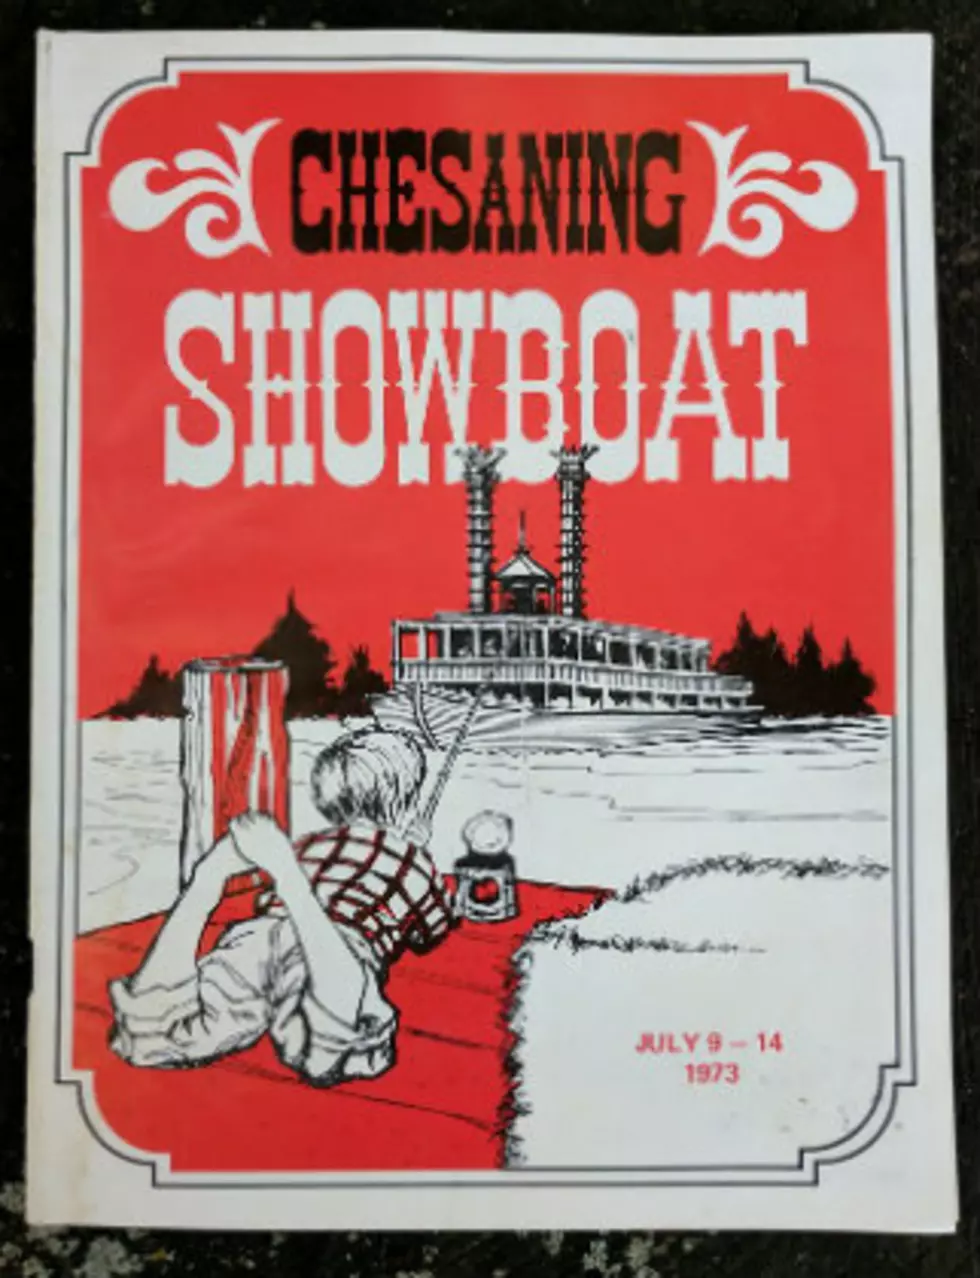 Do You Remember The Chesaning Showboat?